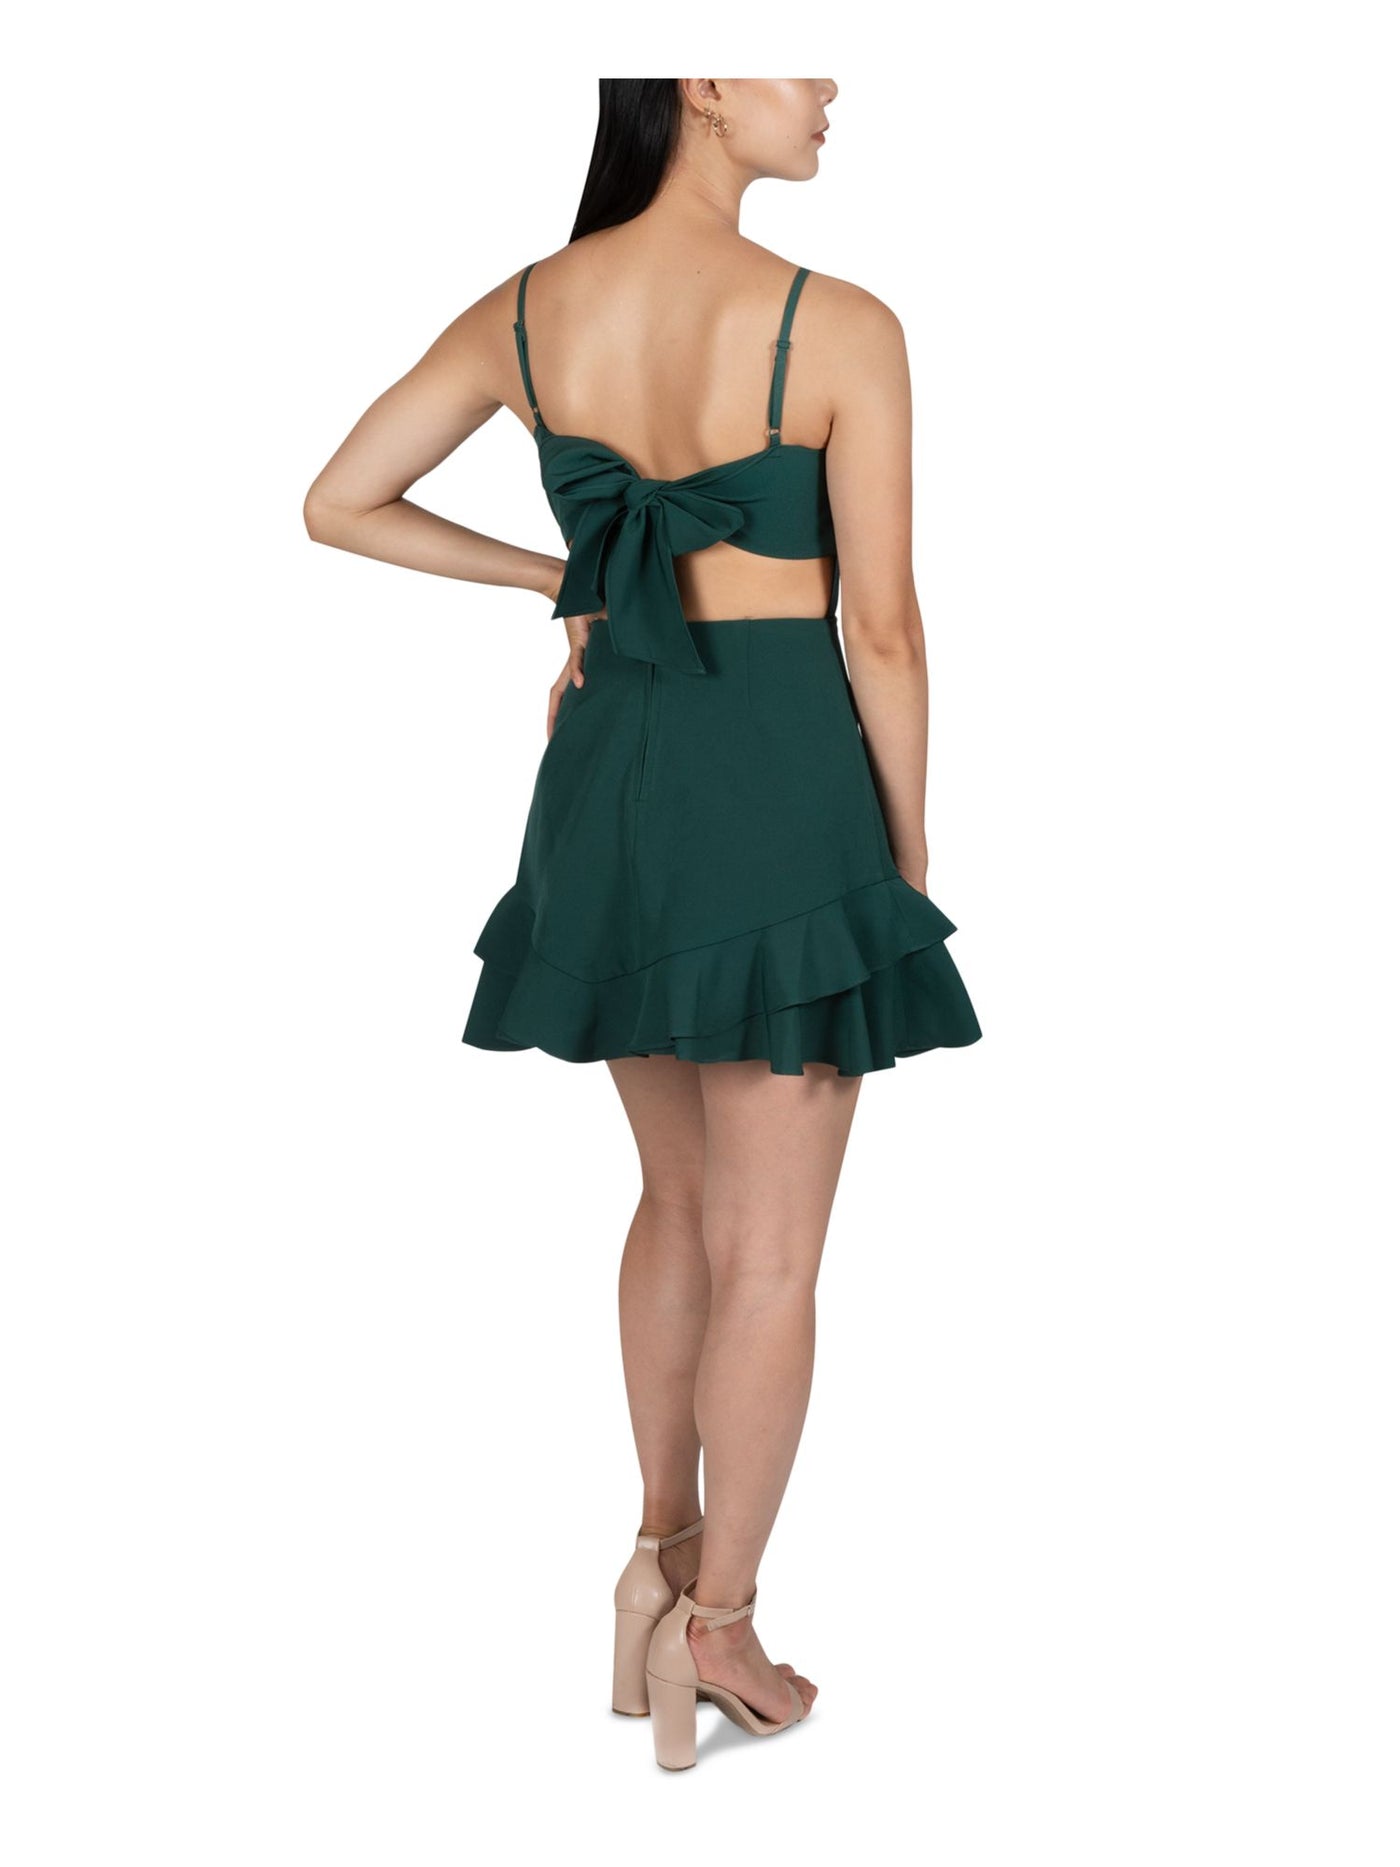 DEAR MOON Womens Green Cut Out Zippered Bow Back Adjustable Straps Spaghetti Strap Square Neck Mini Party Fit + Flare Dress Juniors 1